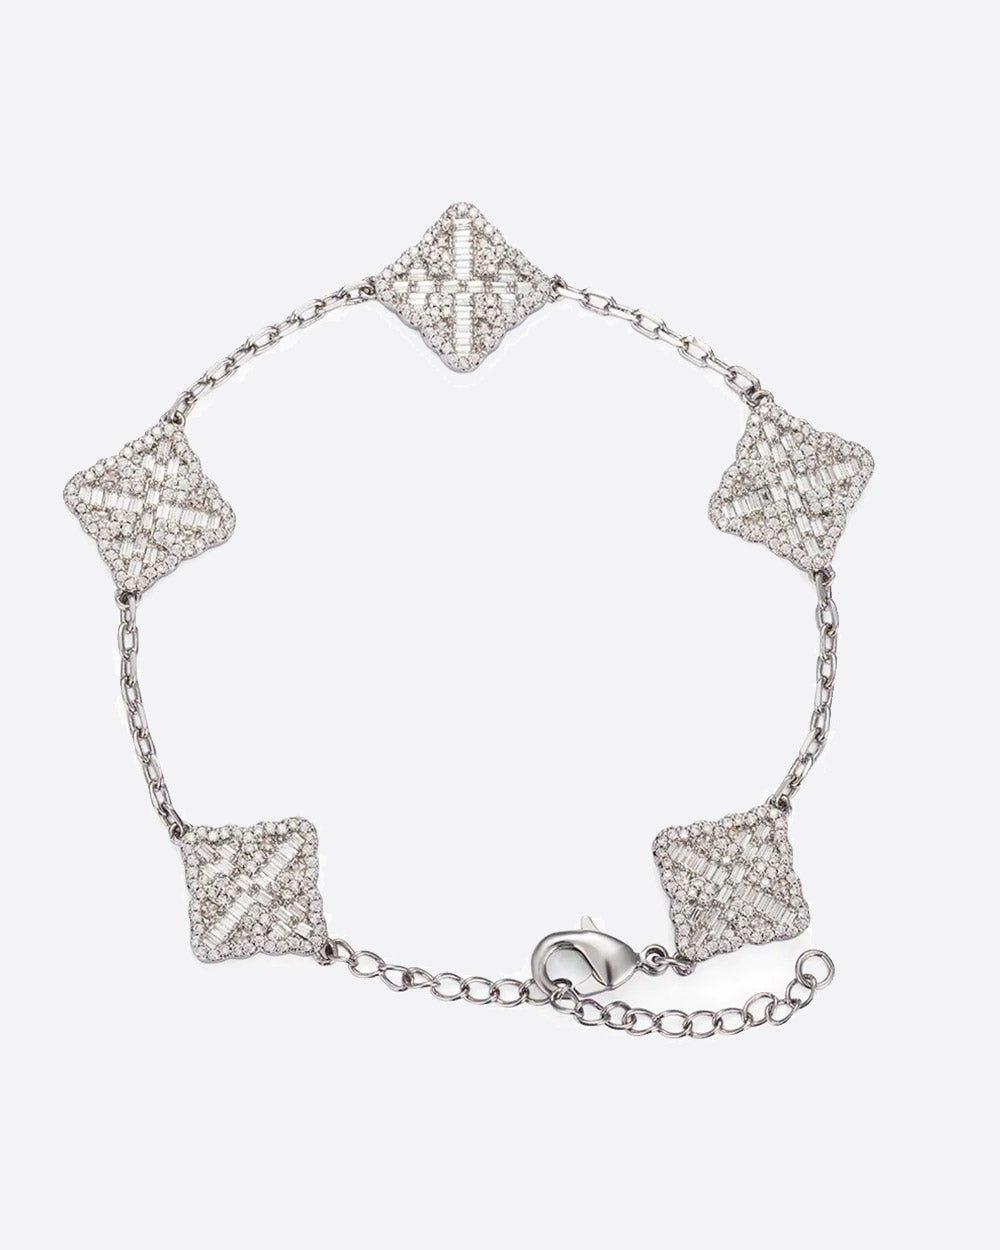 ICED CLOVER BRACELET. - WHITE GOLD - DRIP IN THE JEWEL